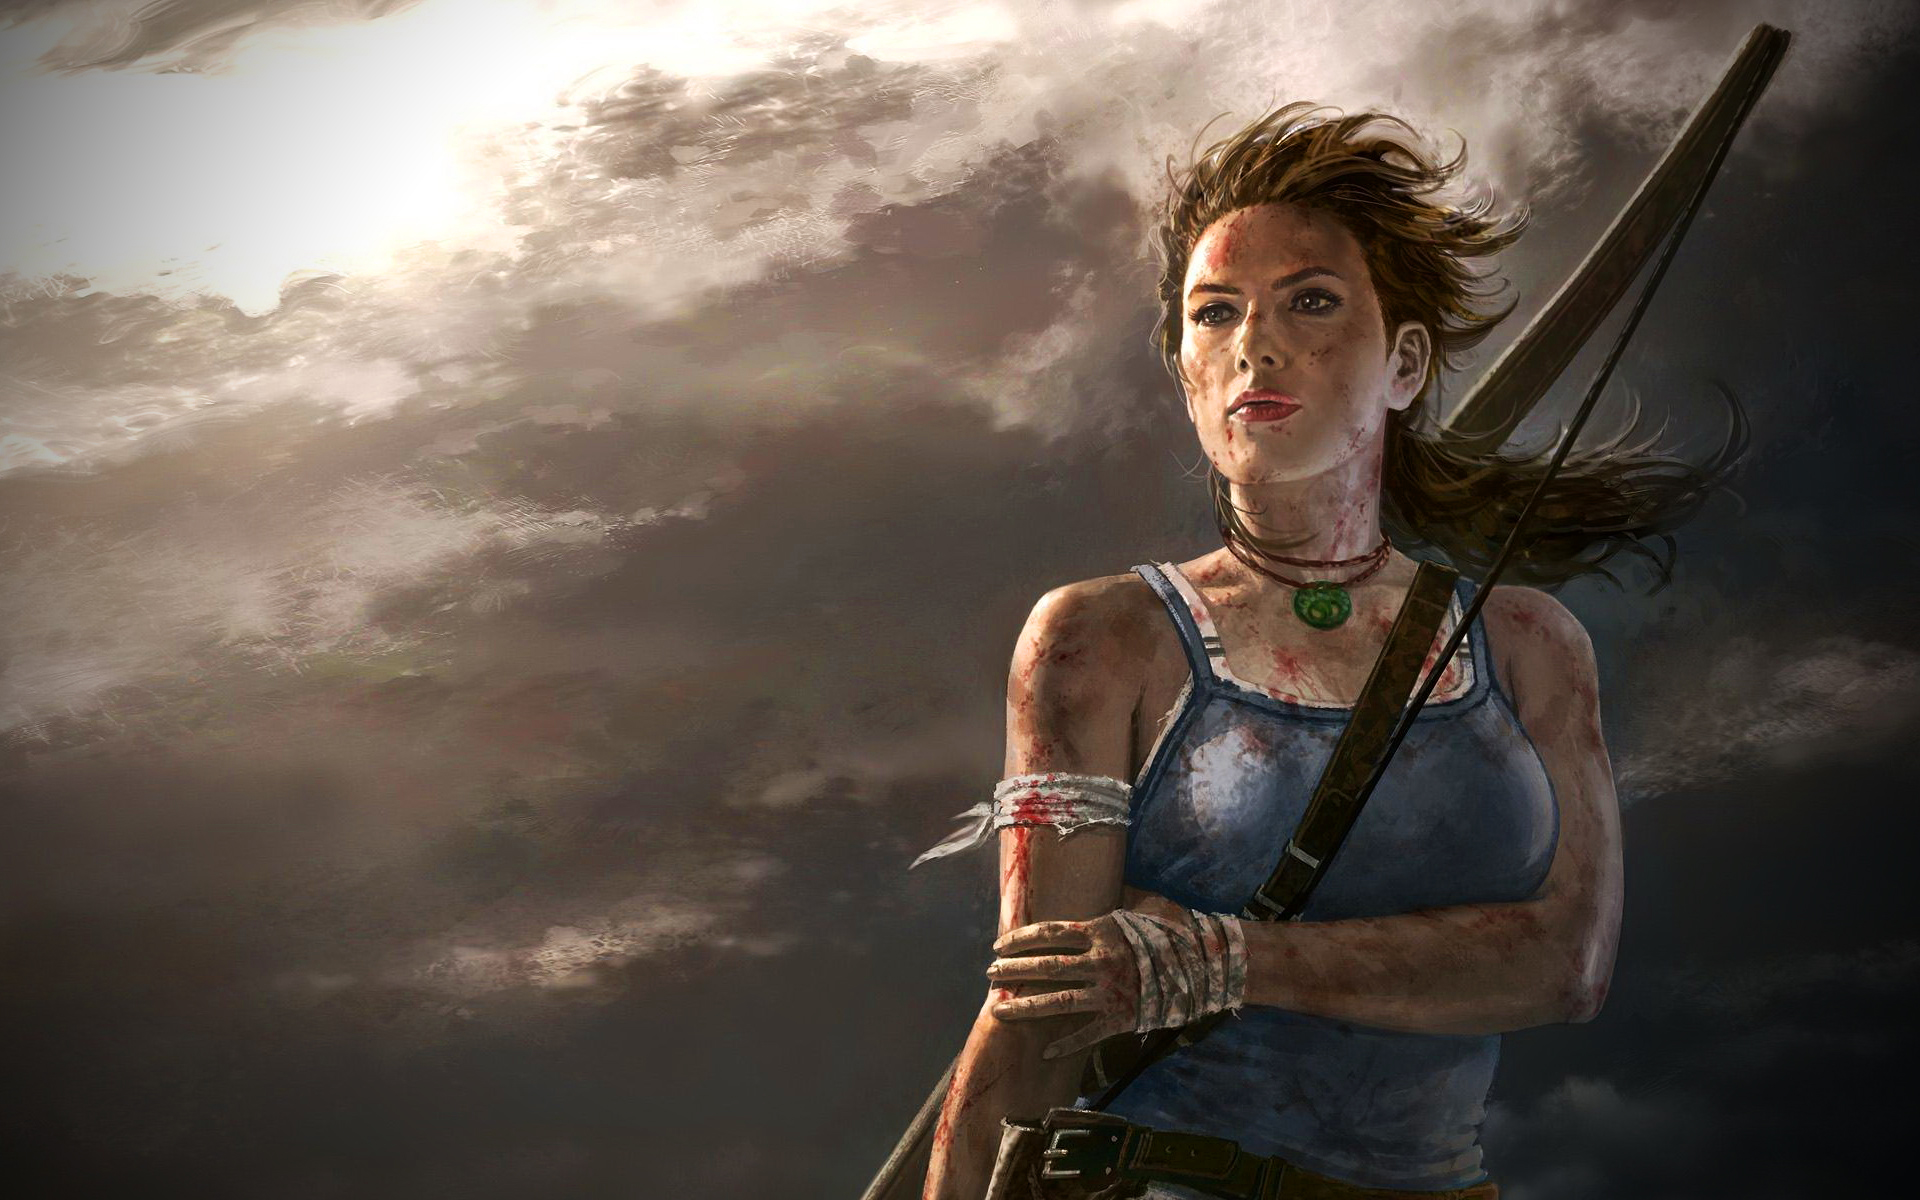  17 2015 By Stephen Comments Off on Tomb Raider 2013 Wallpaper